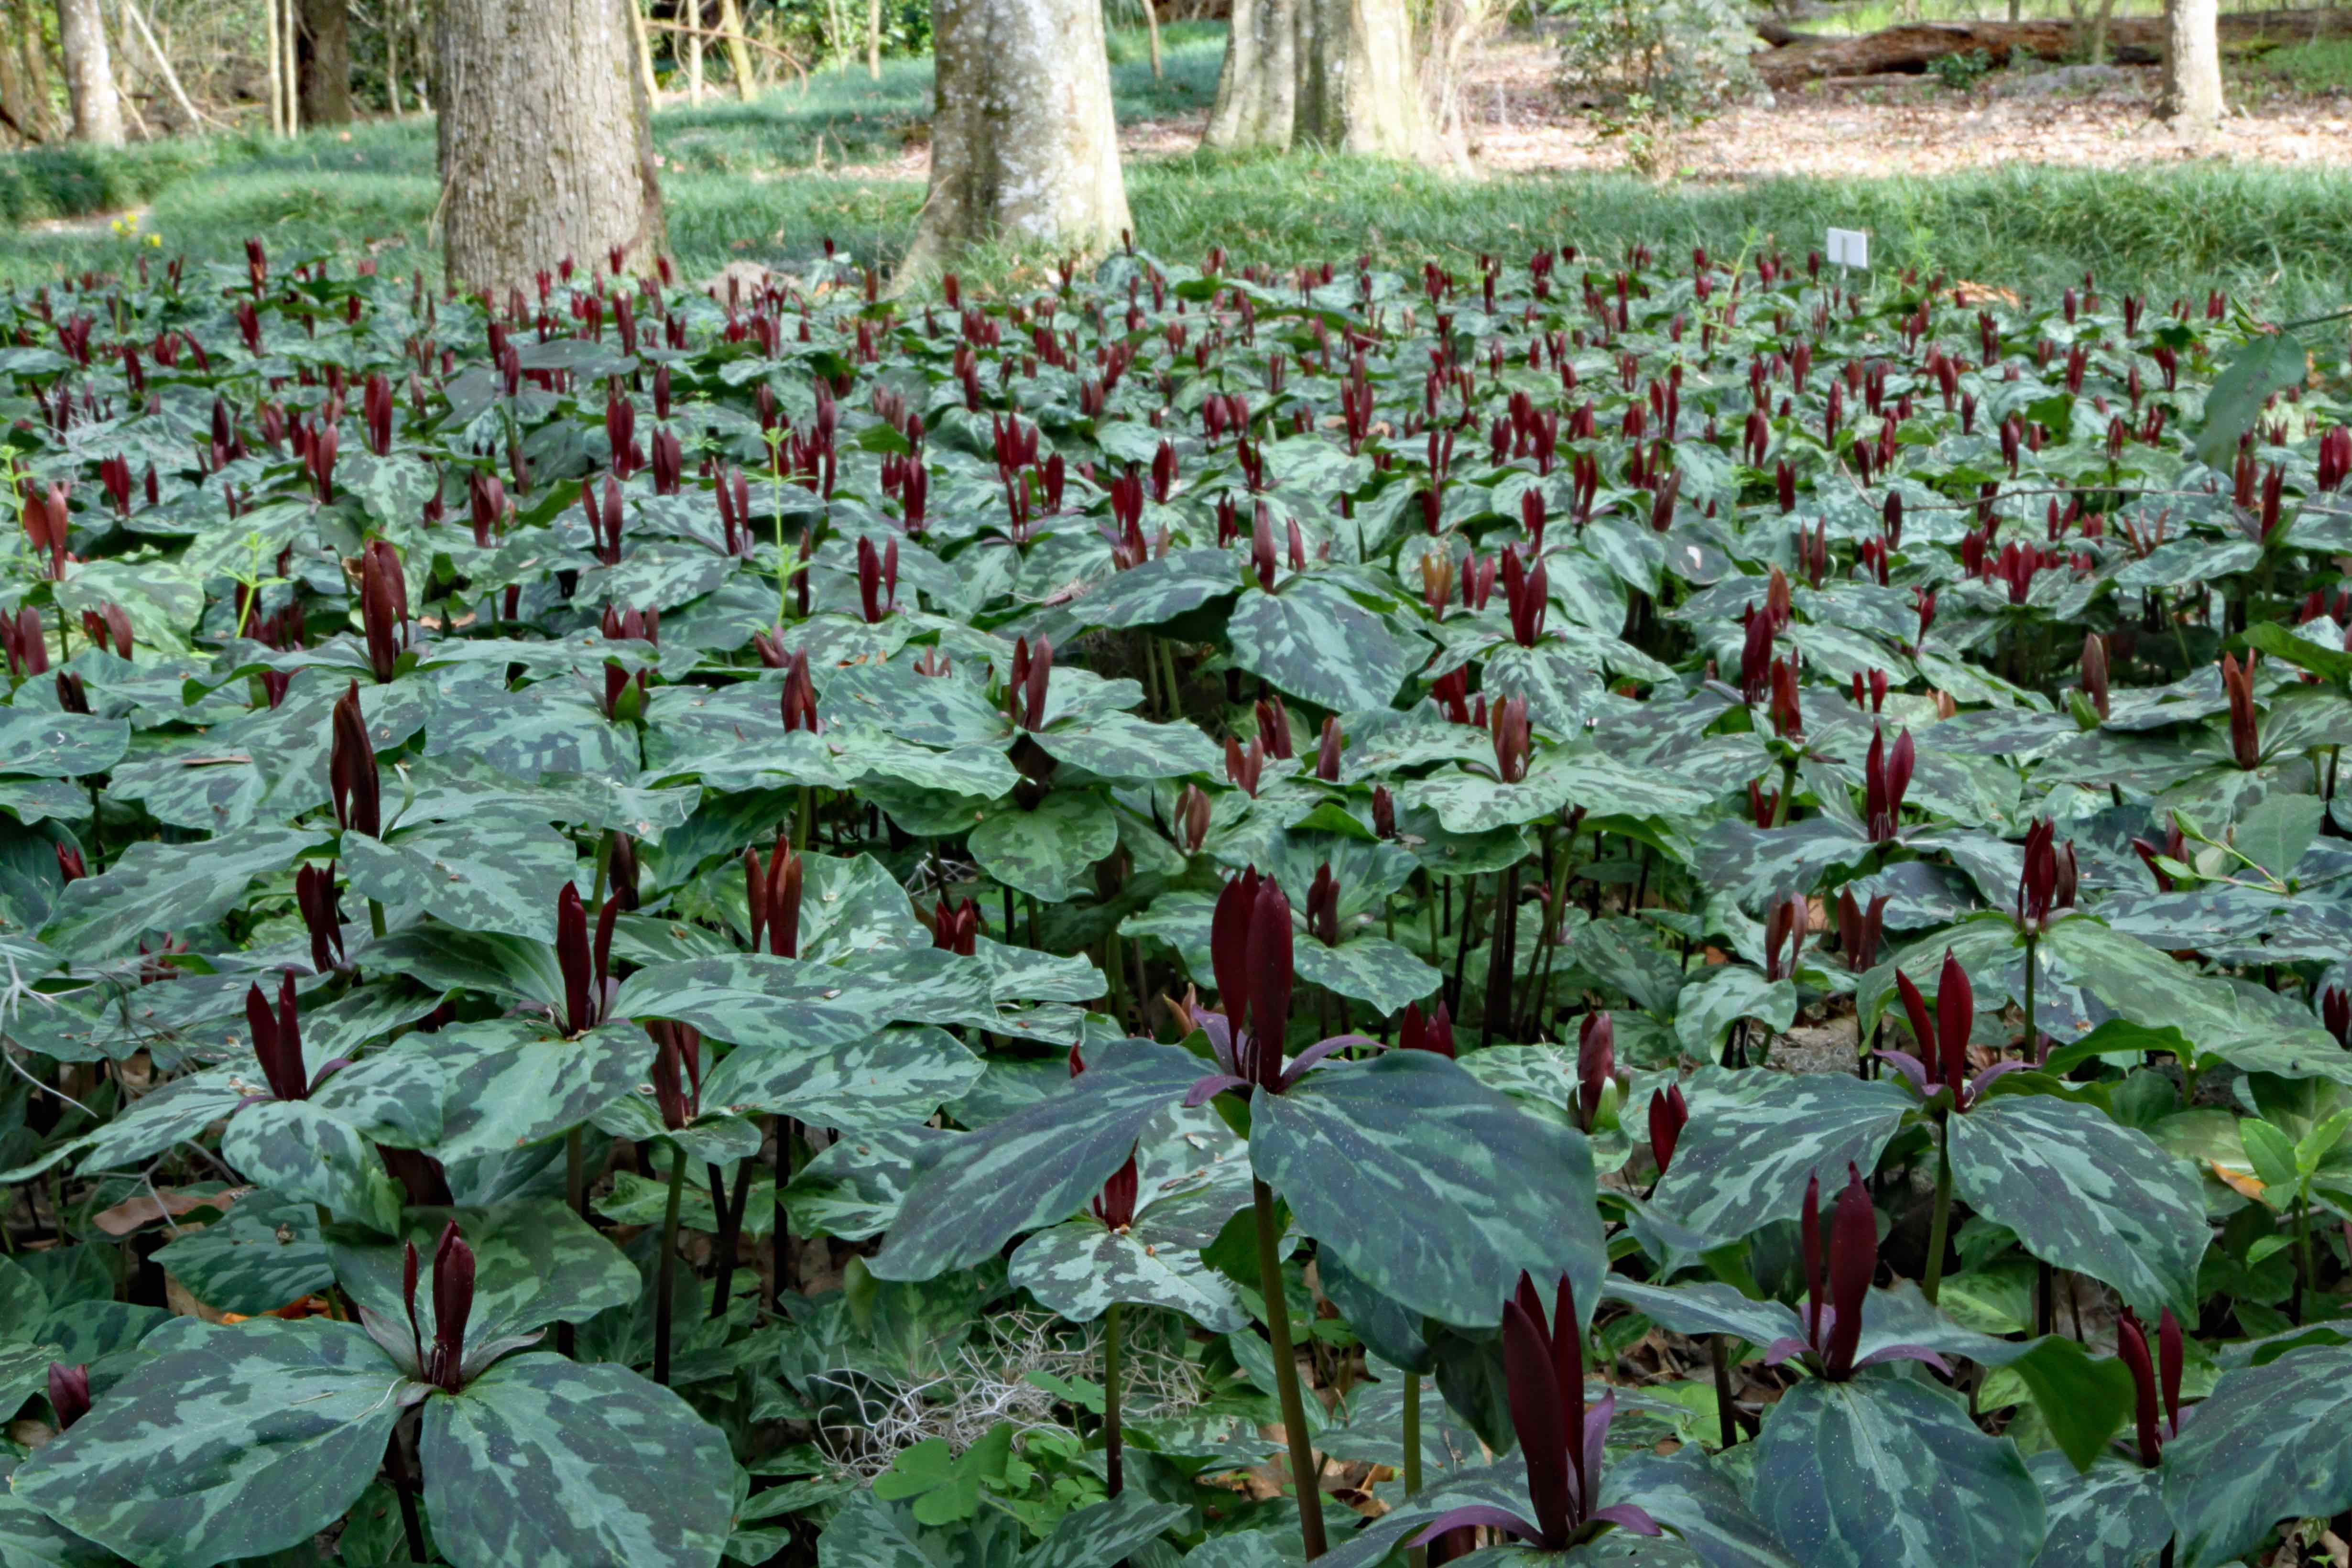 The Scientific Name is Trillium maculatum. You will likely hear them called Mottled Trillium, Spotted Trillium, Spotted Wakerobin. This picture shows the A wonderful display of Trillum maculatum at Kanapaha Botanical Gardens in Gainesville, Florida of Trillium maculatum